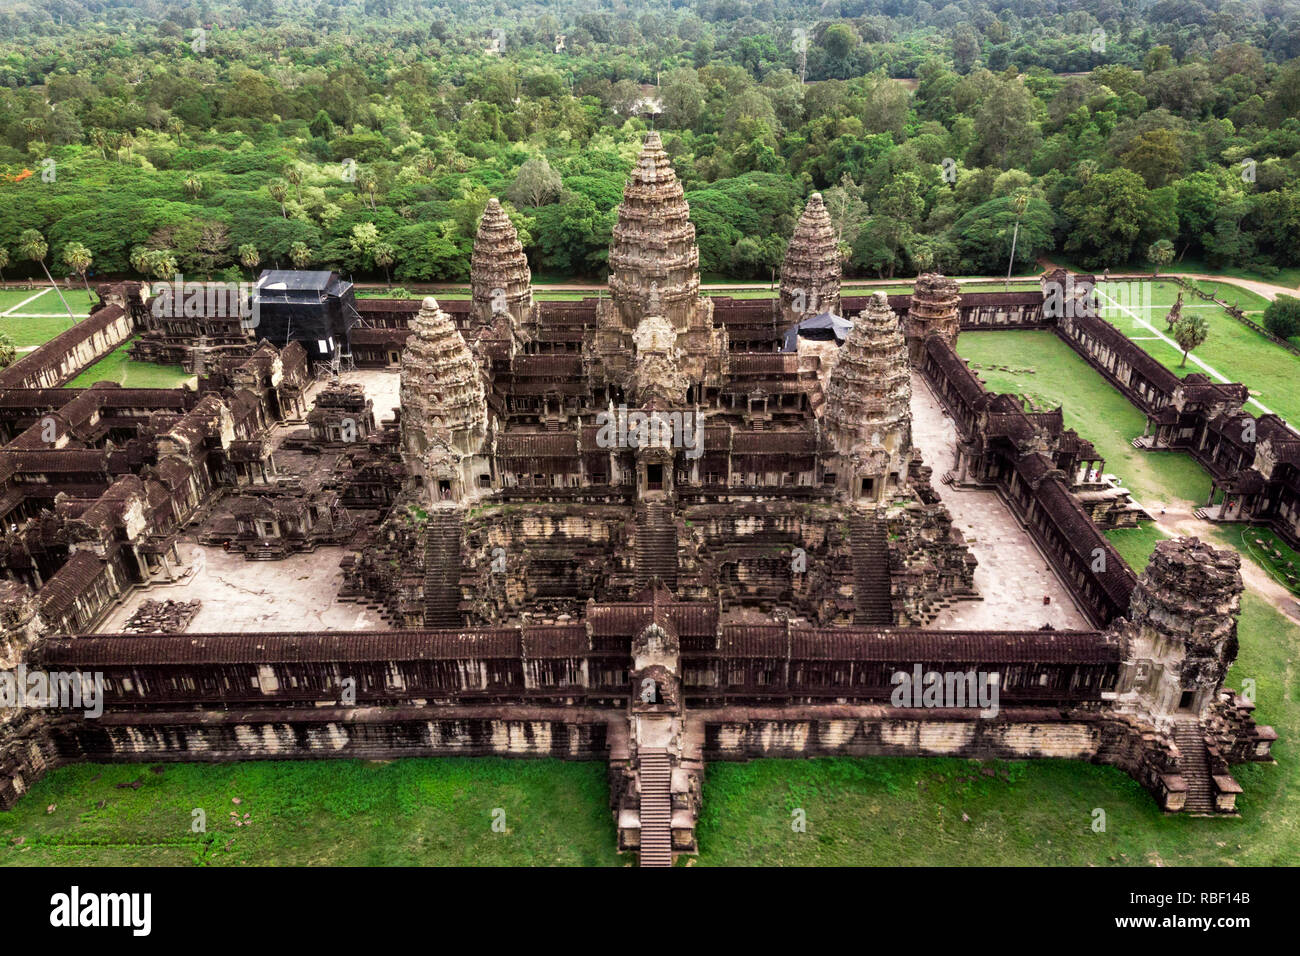 Aerial view of Angkor Wat temple, Siem Reap, Cambodia. Stock Photo